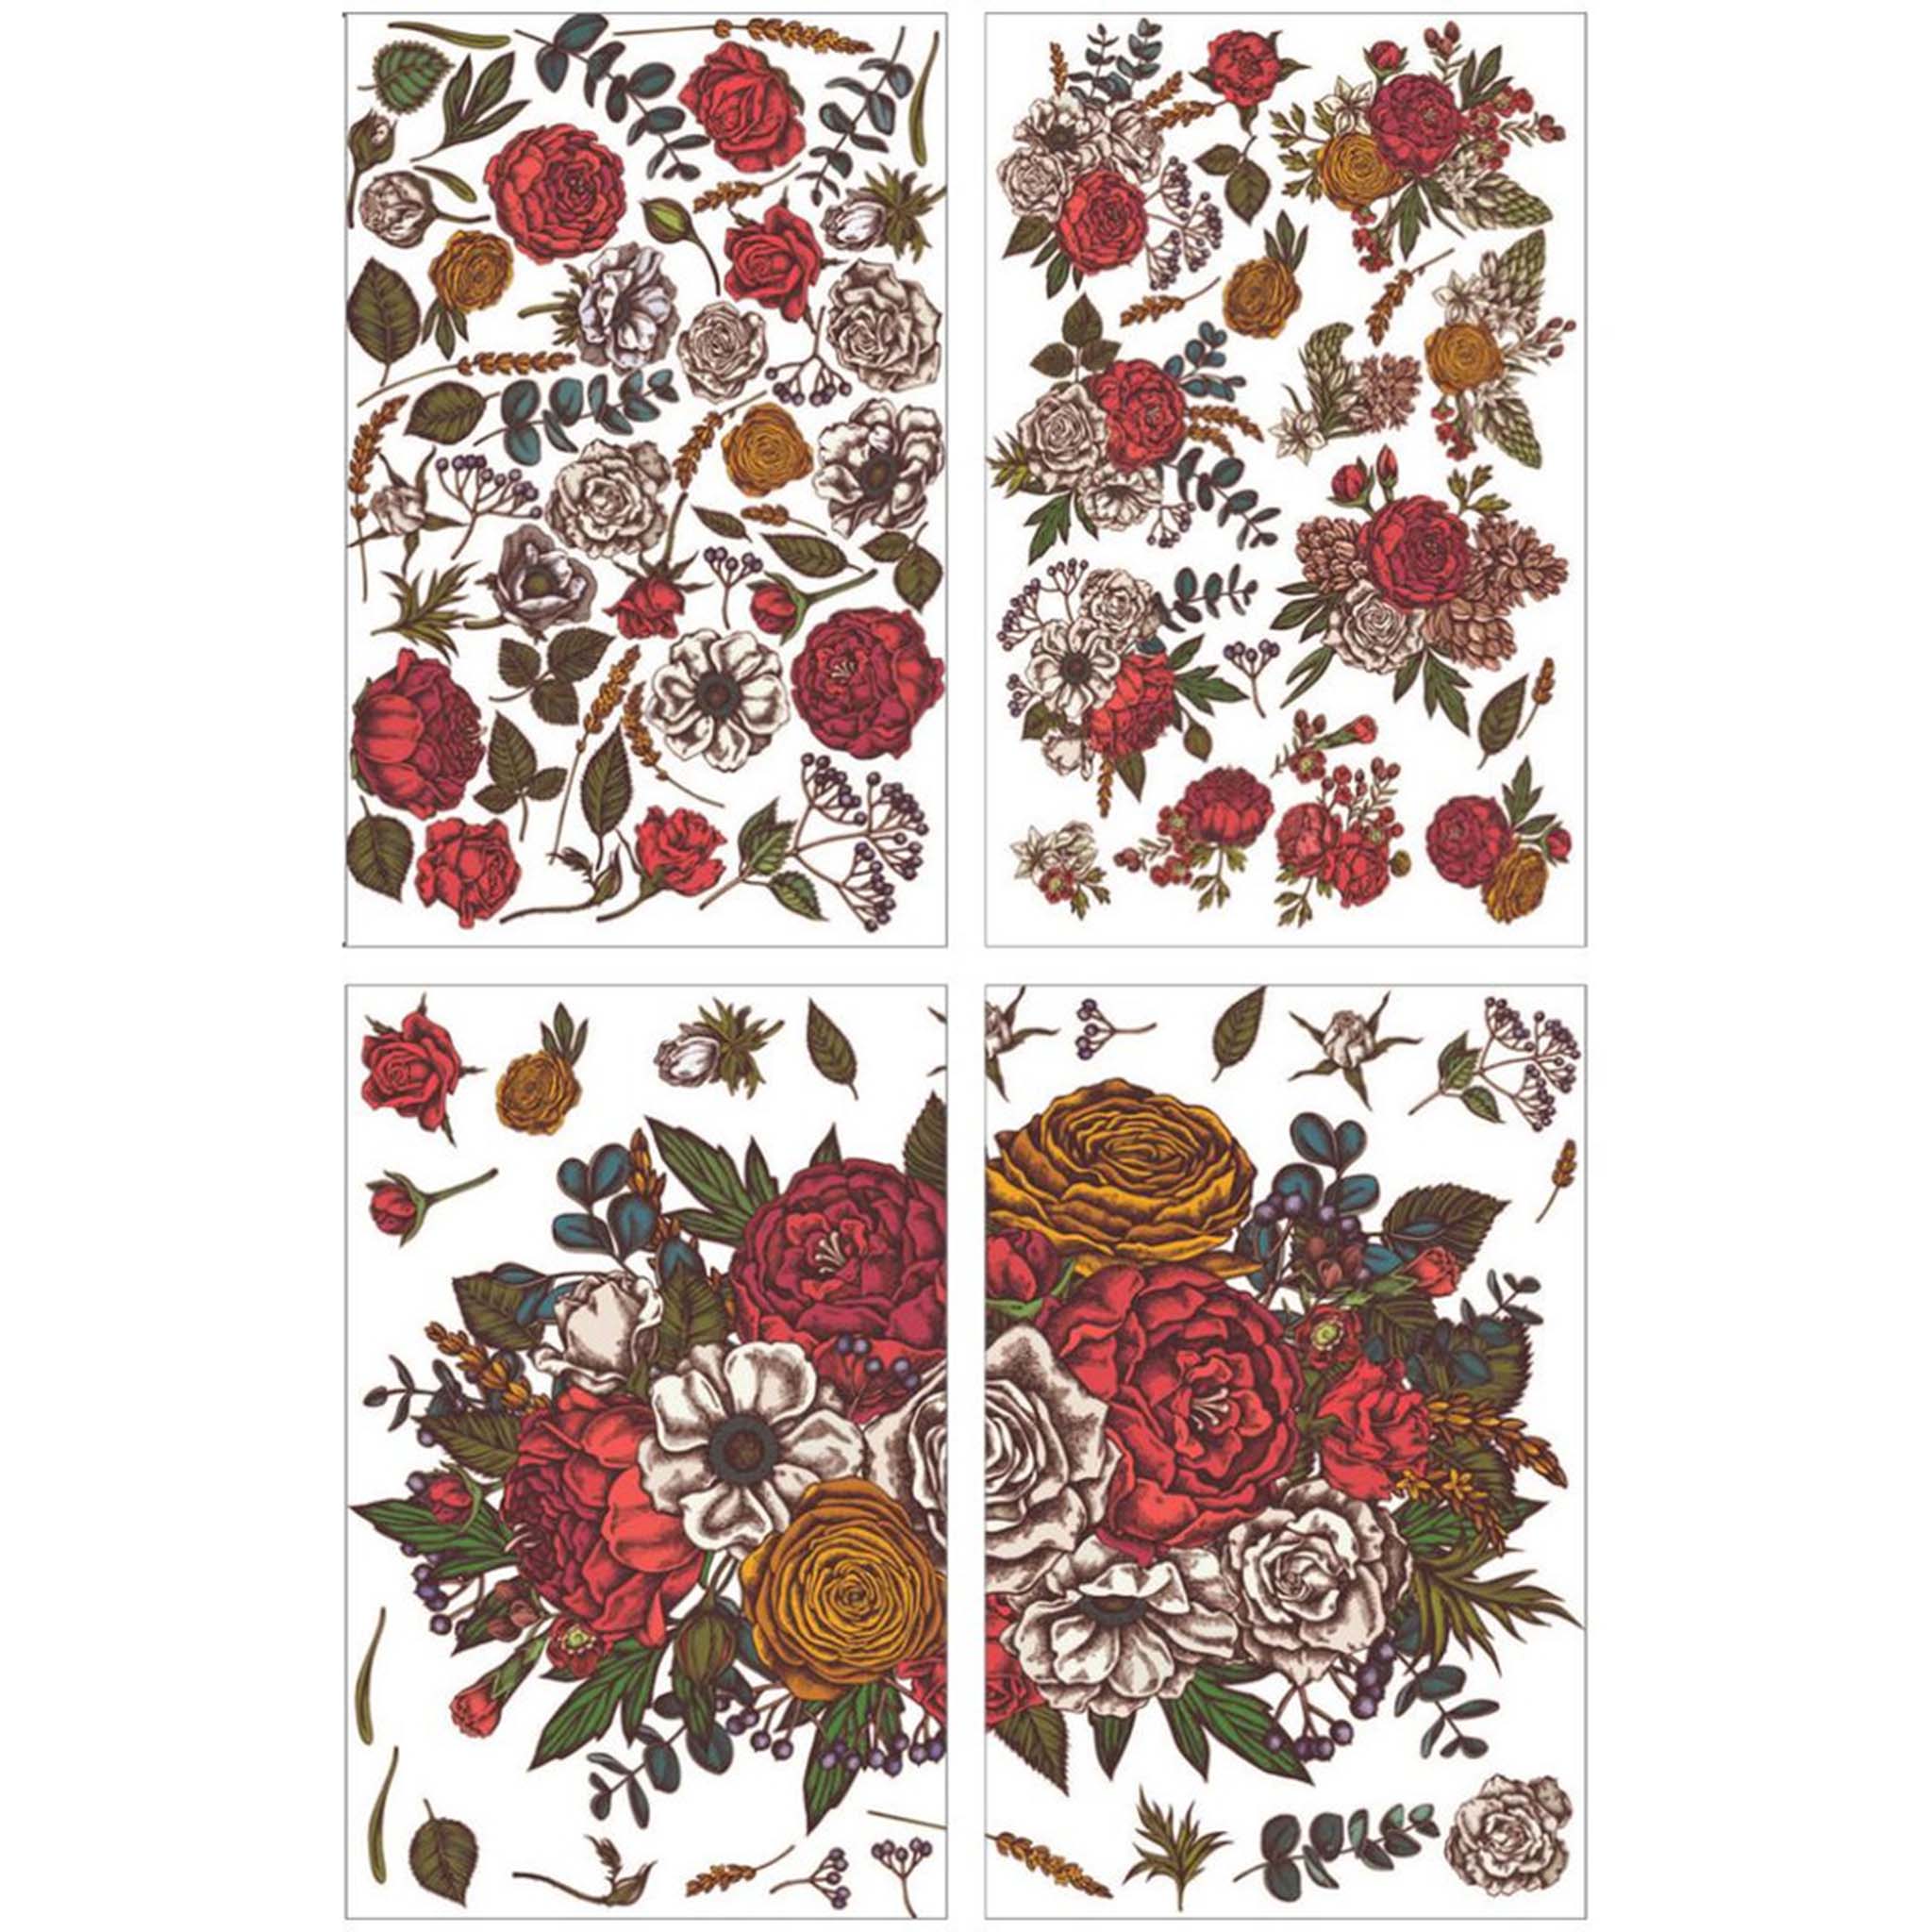 Four sheets of a rub-on transfer are against a white background and feature a large floral bouquet and scattered flowers in muted reds, yellows, and white.